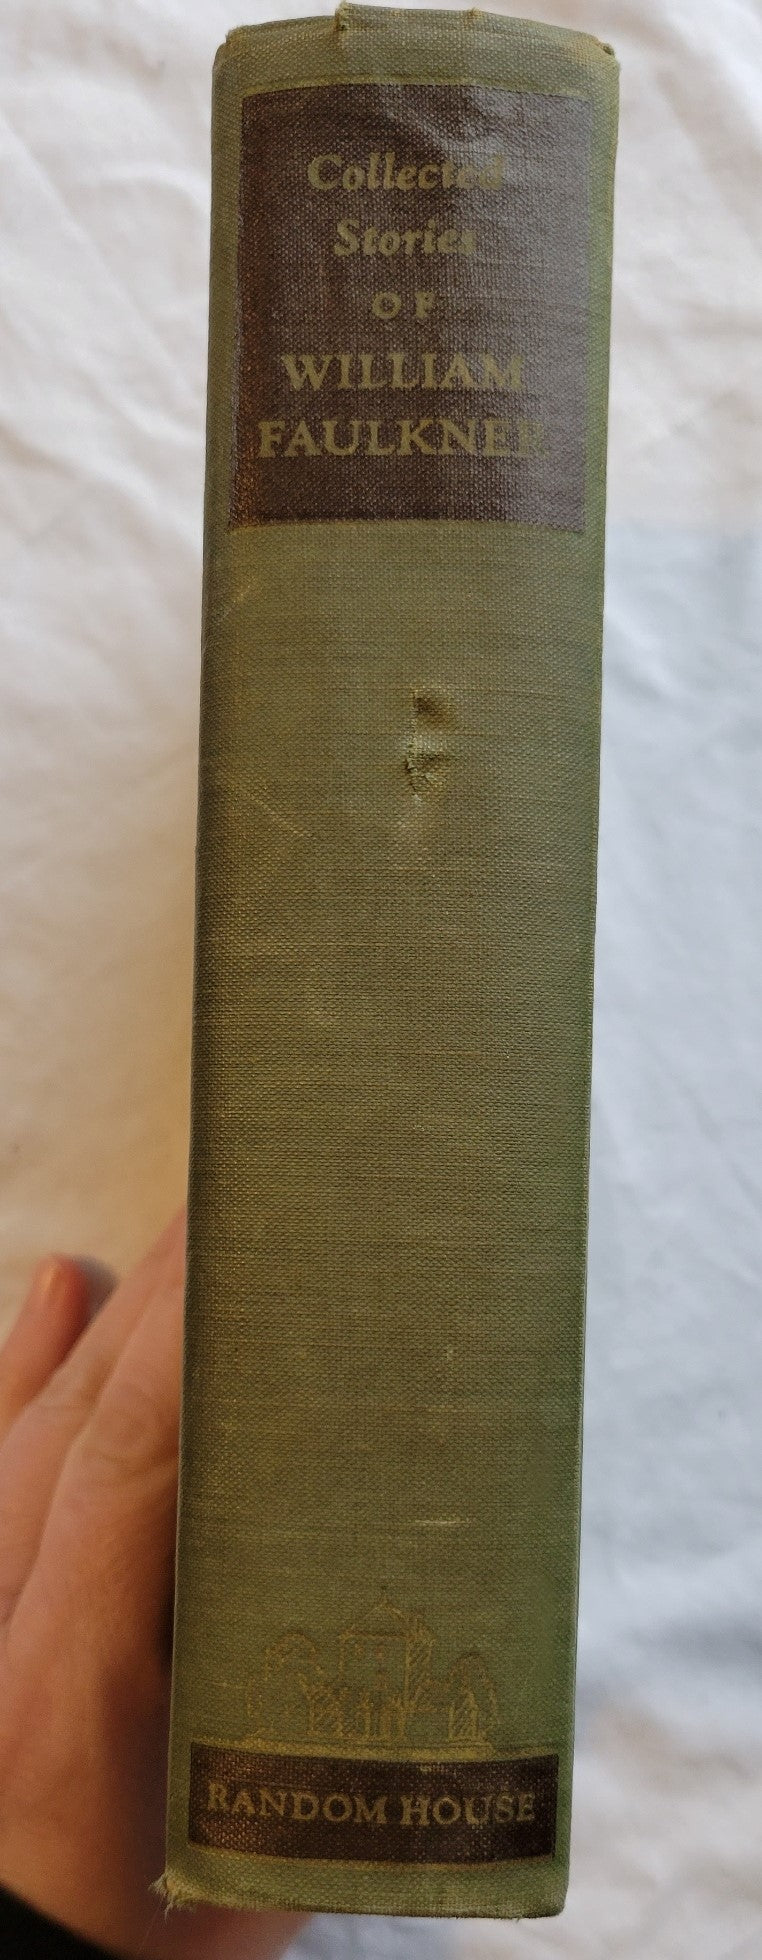 Vintage book. "Collected Stories" by William Faulkner, published by Random House. View of spine.